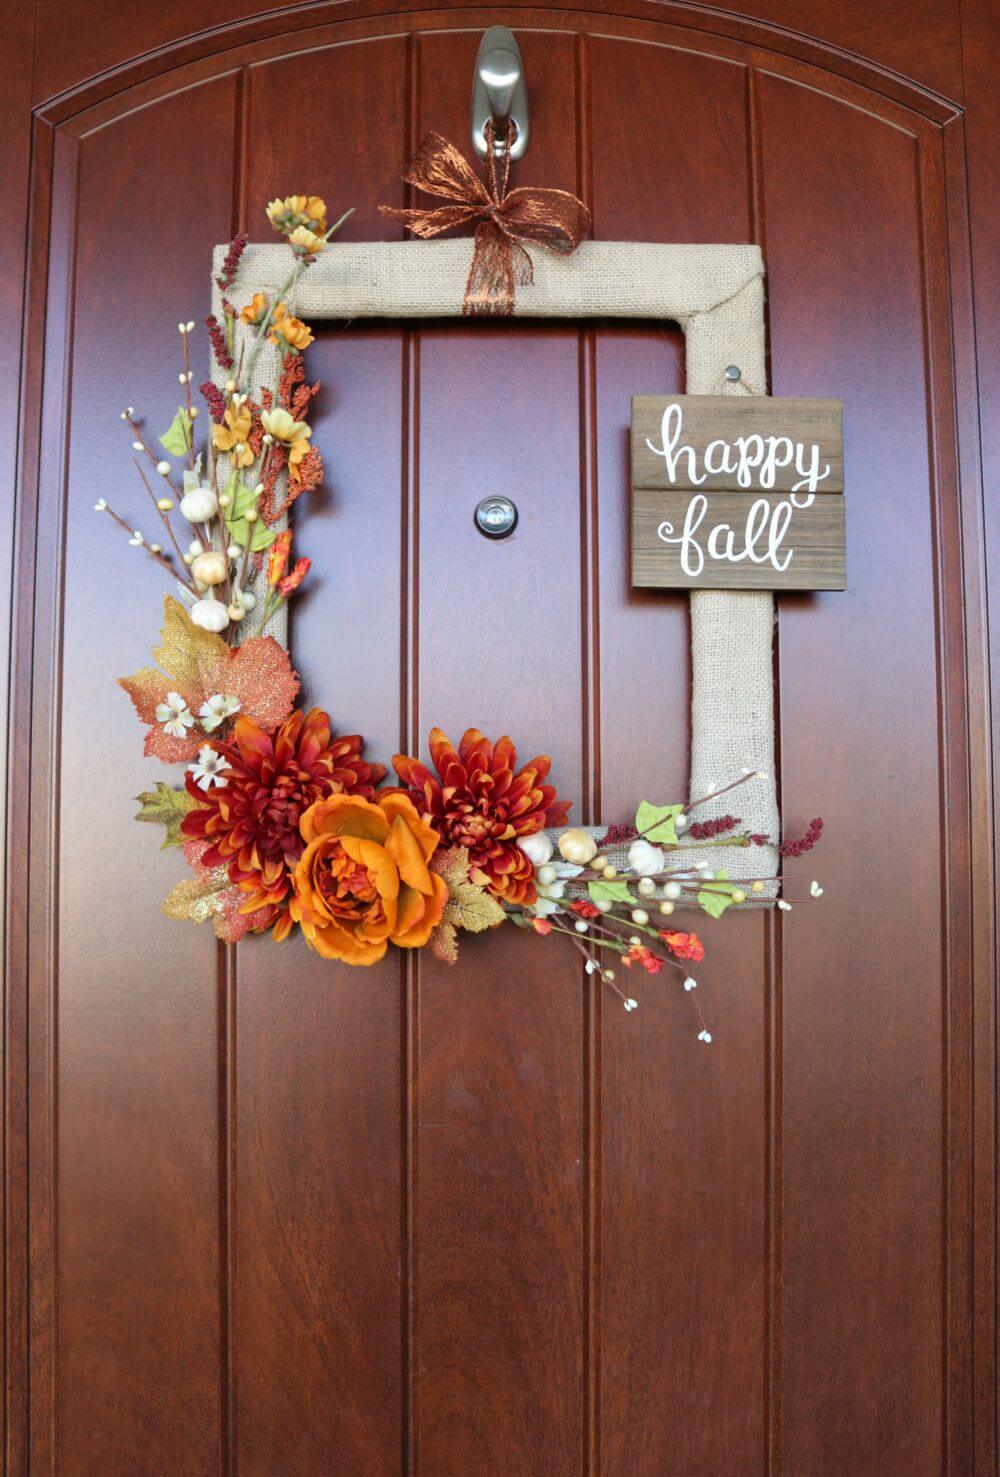 A wooden door with a happy fall sign on it
